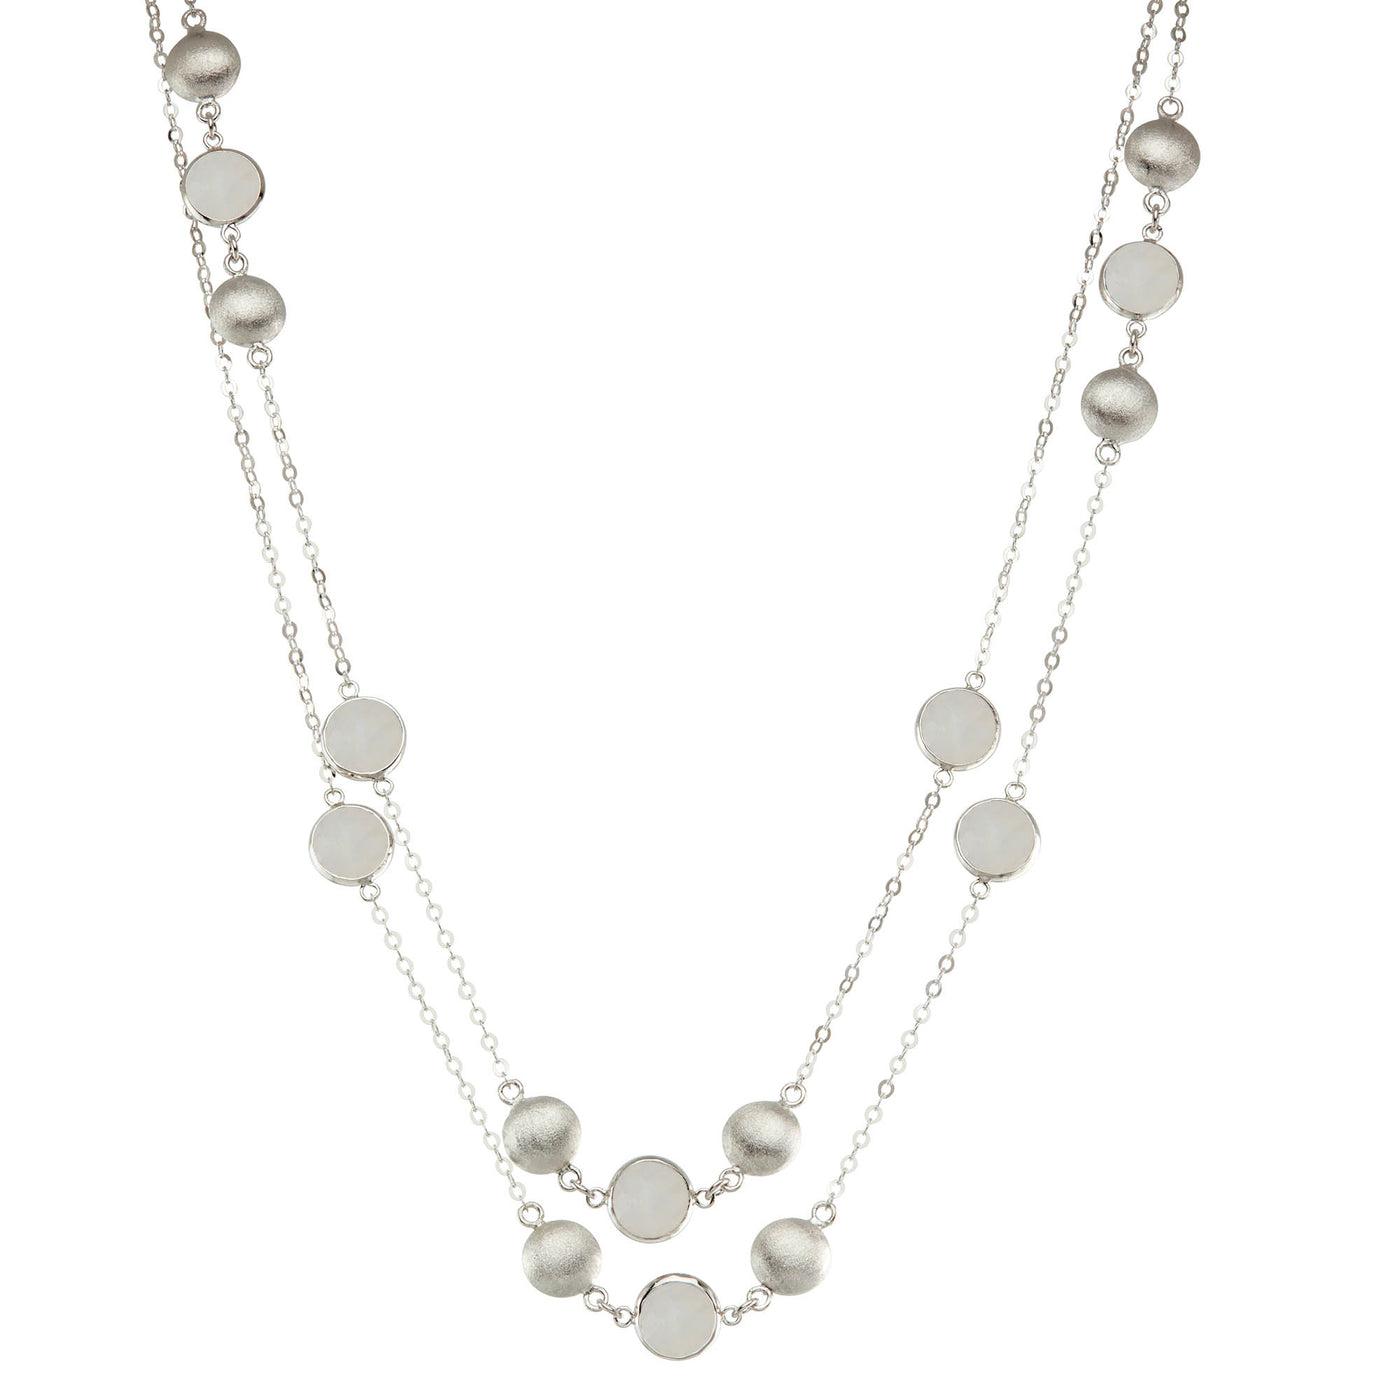 Rebecca Sloane Silver 3 Station Necklace With Round Moonstone